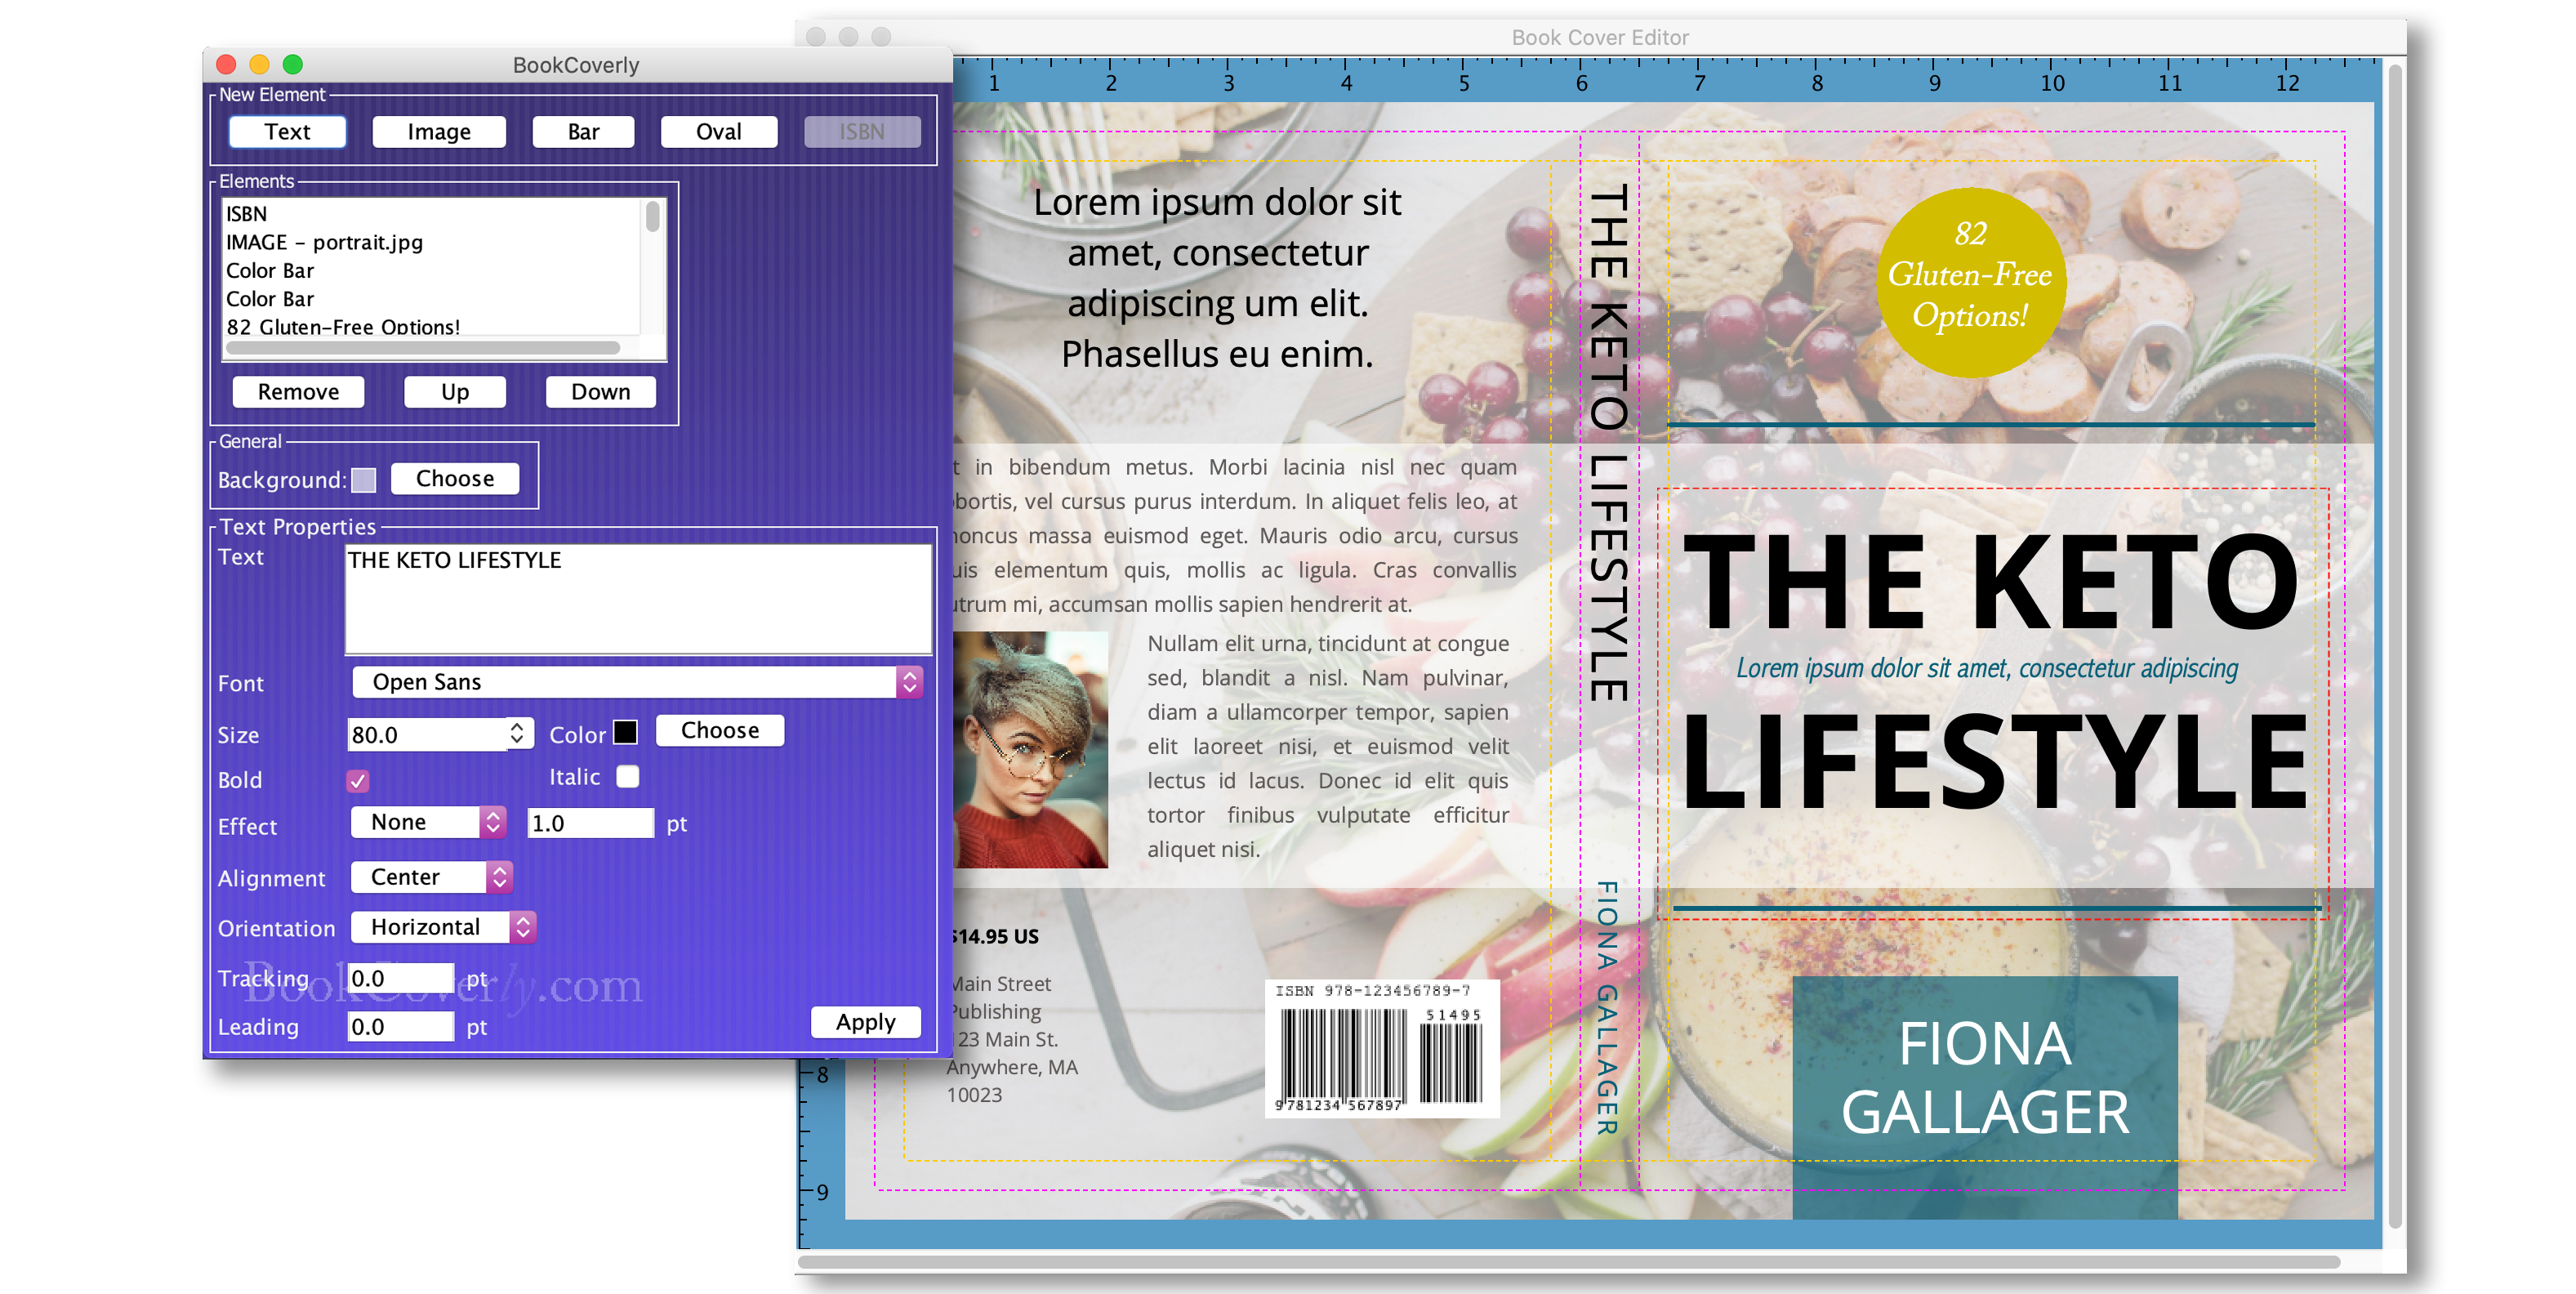 book-cover-templates-bookcoverly